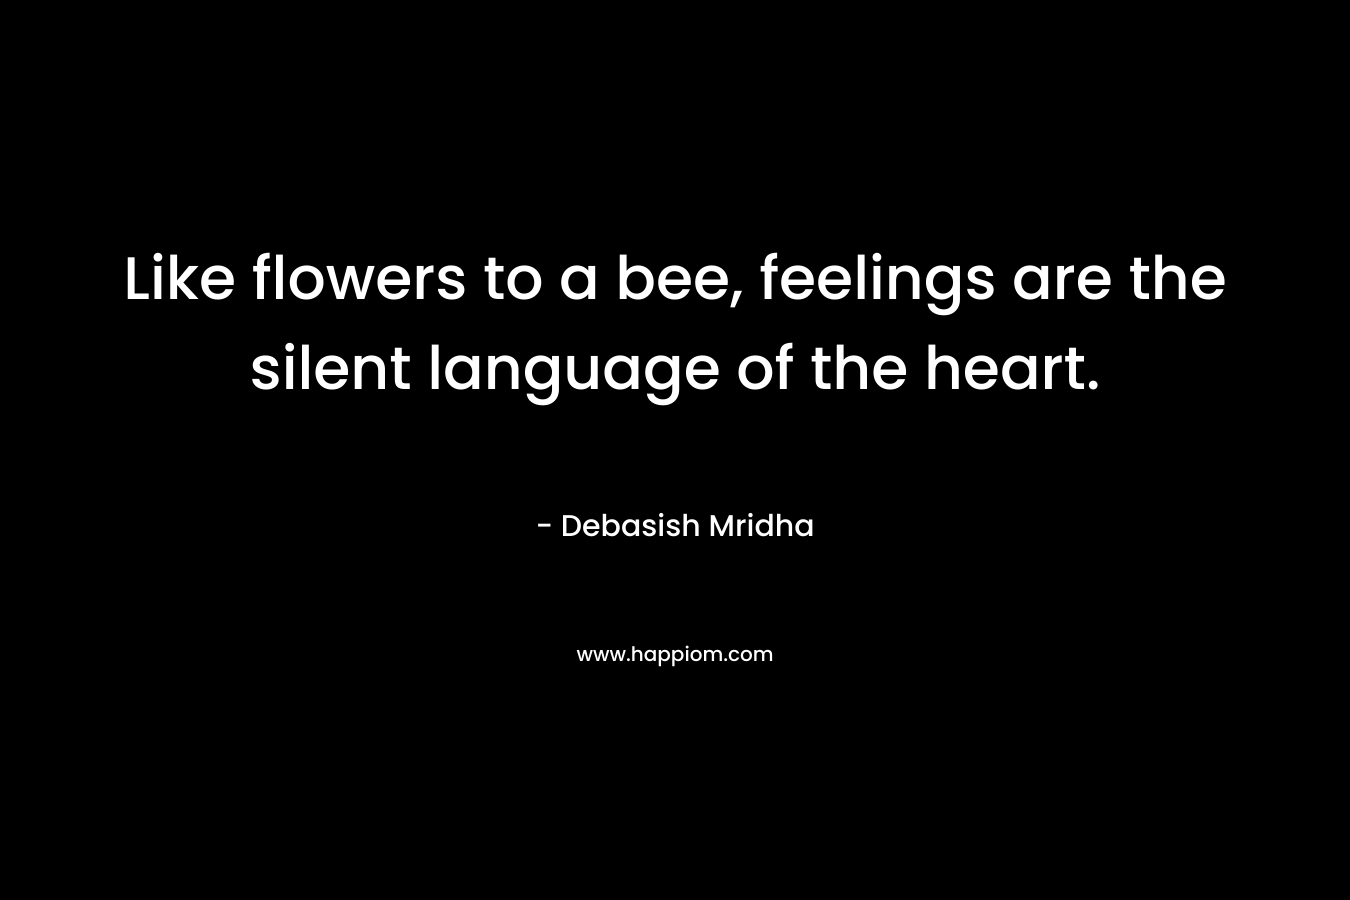 Like flowers to a bee, feelings are the silent language of the heart.